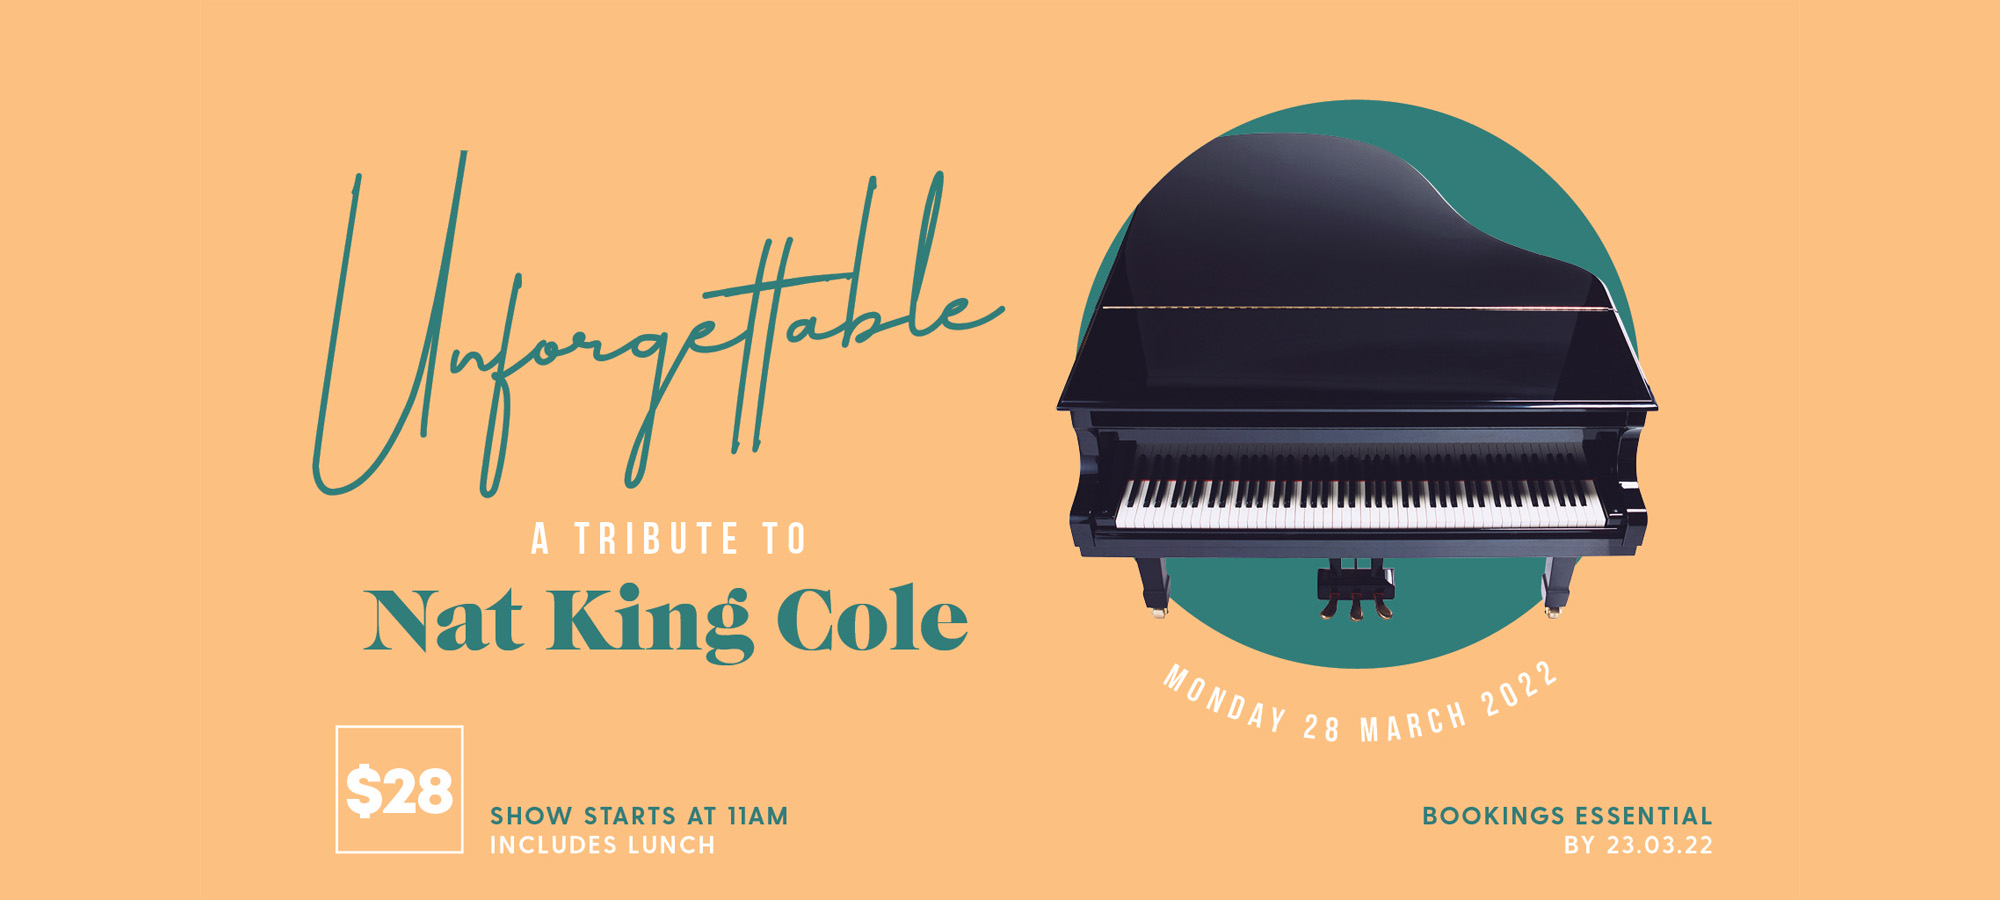 Unforgettable – A Tribute to Nat King Cole